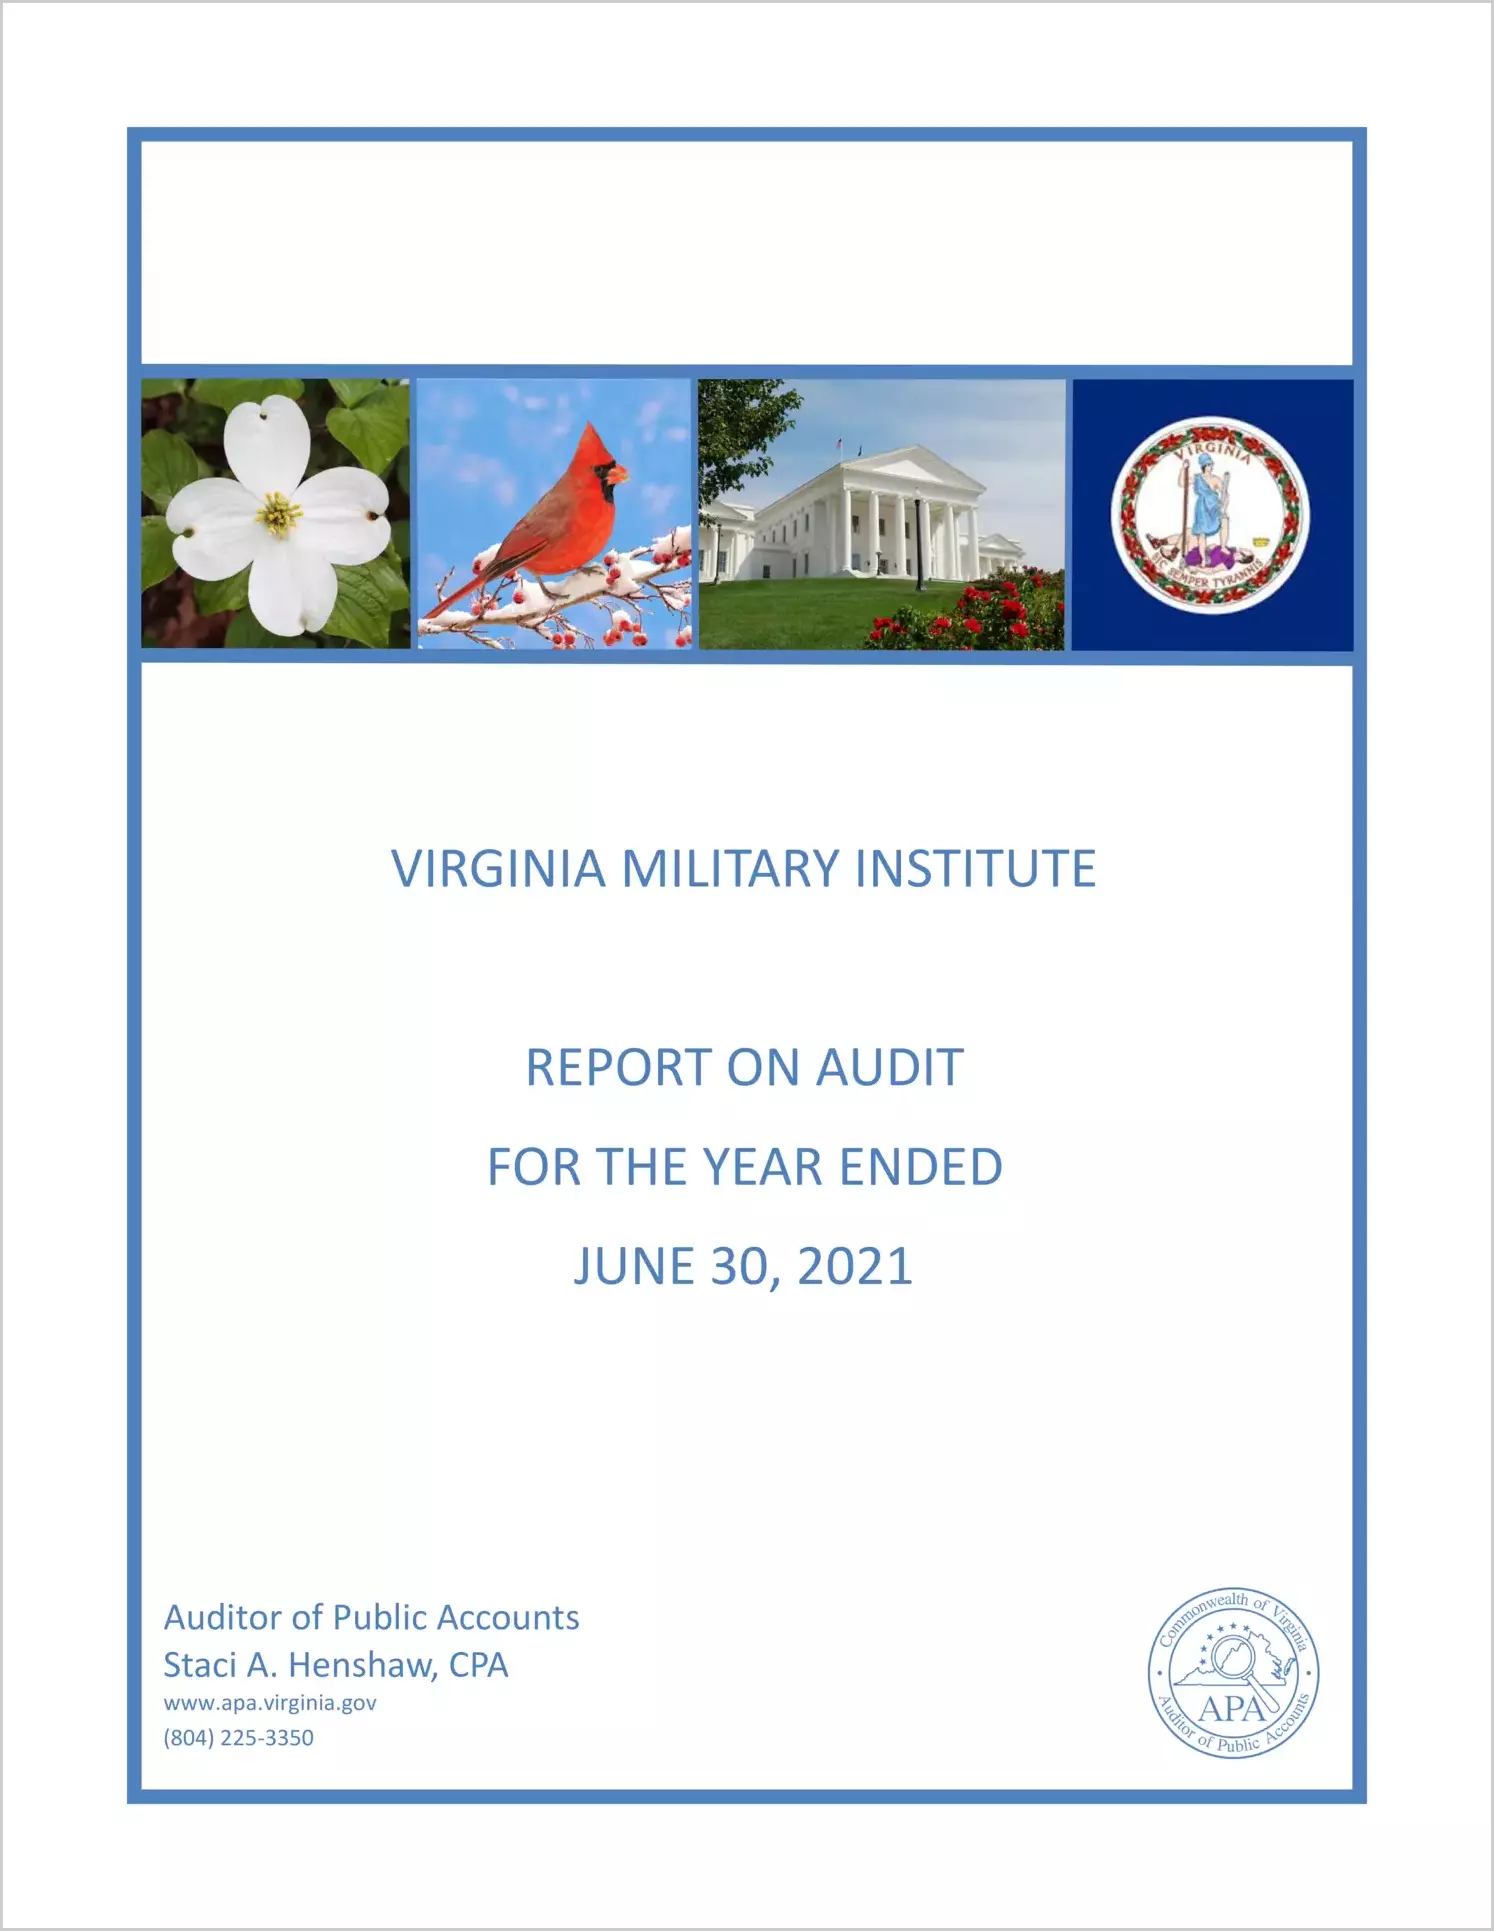 Virginia Military Institute for the year ended June 30, 2021